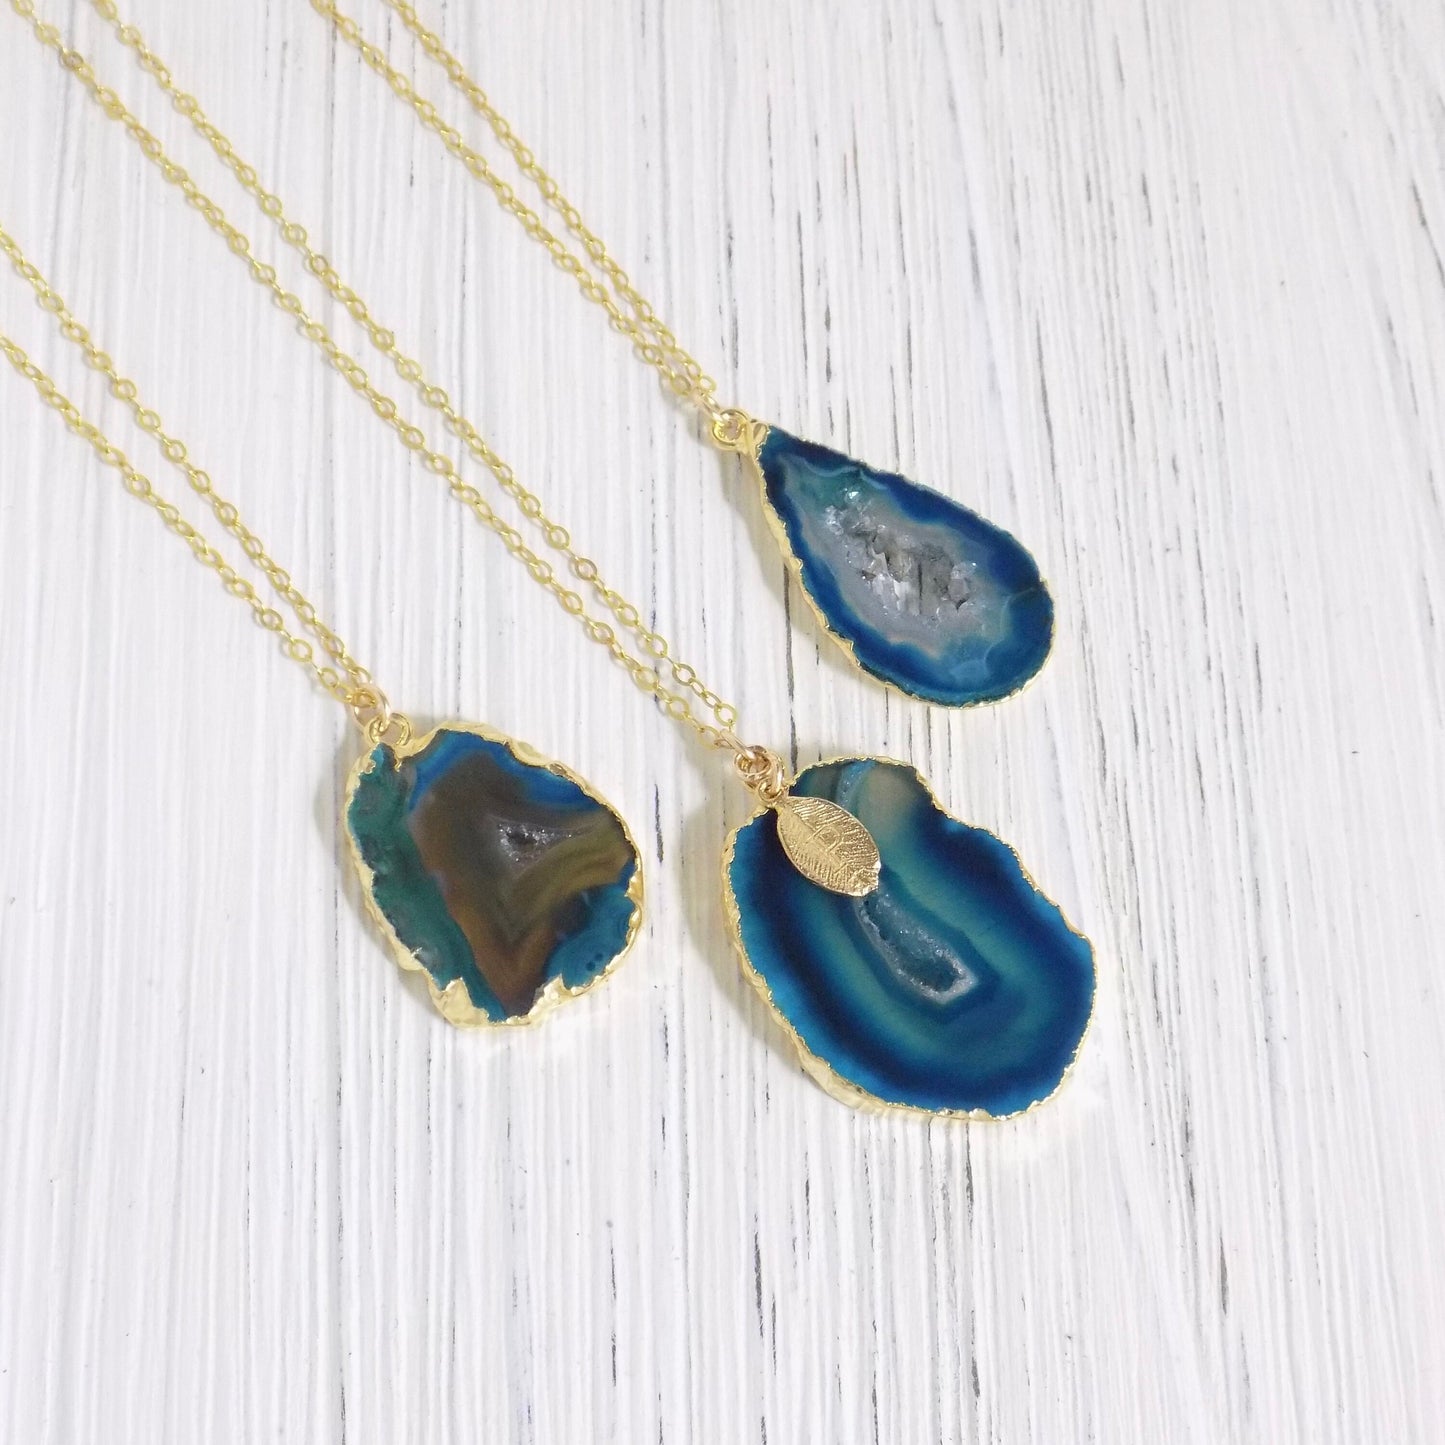 Small Geode Necklace Gold - Personalized Turquoise Stone Necklace